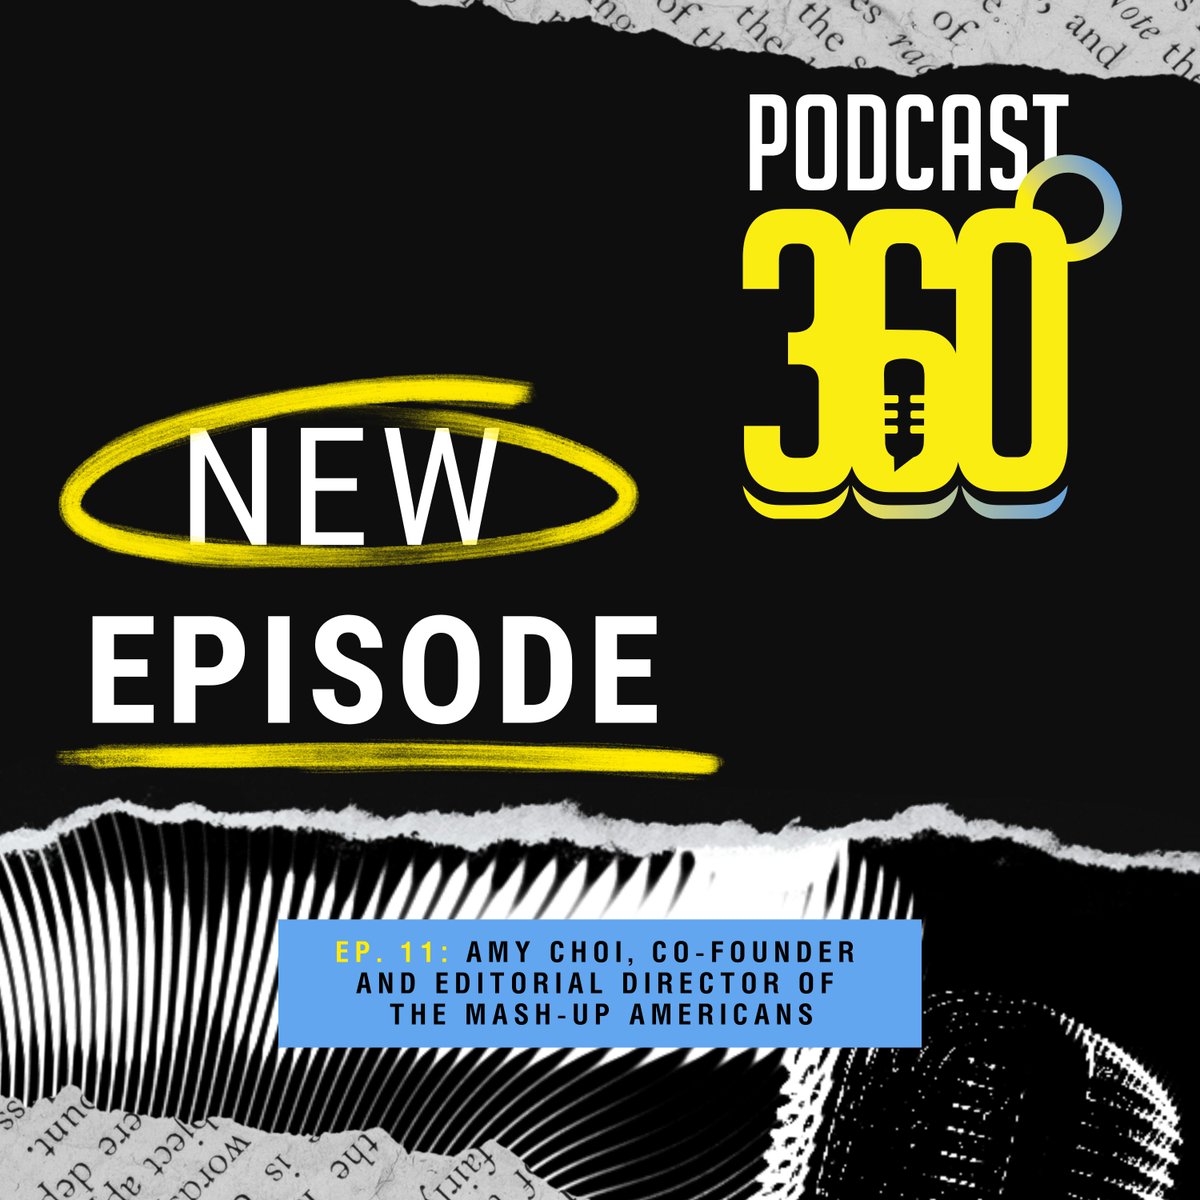 🎧 New Episode Alert! 🌟 Join us for the latest episode of Podcast 360, where our host is the fantastic Eric Nuzum, and we're thrilled to welcome Amy Choi, co-founder and editorial director of @mashupamerican , as our special guest. @DCPofficial @awesomechoi @MagnifNoise